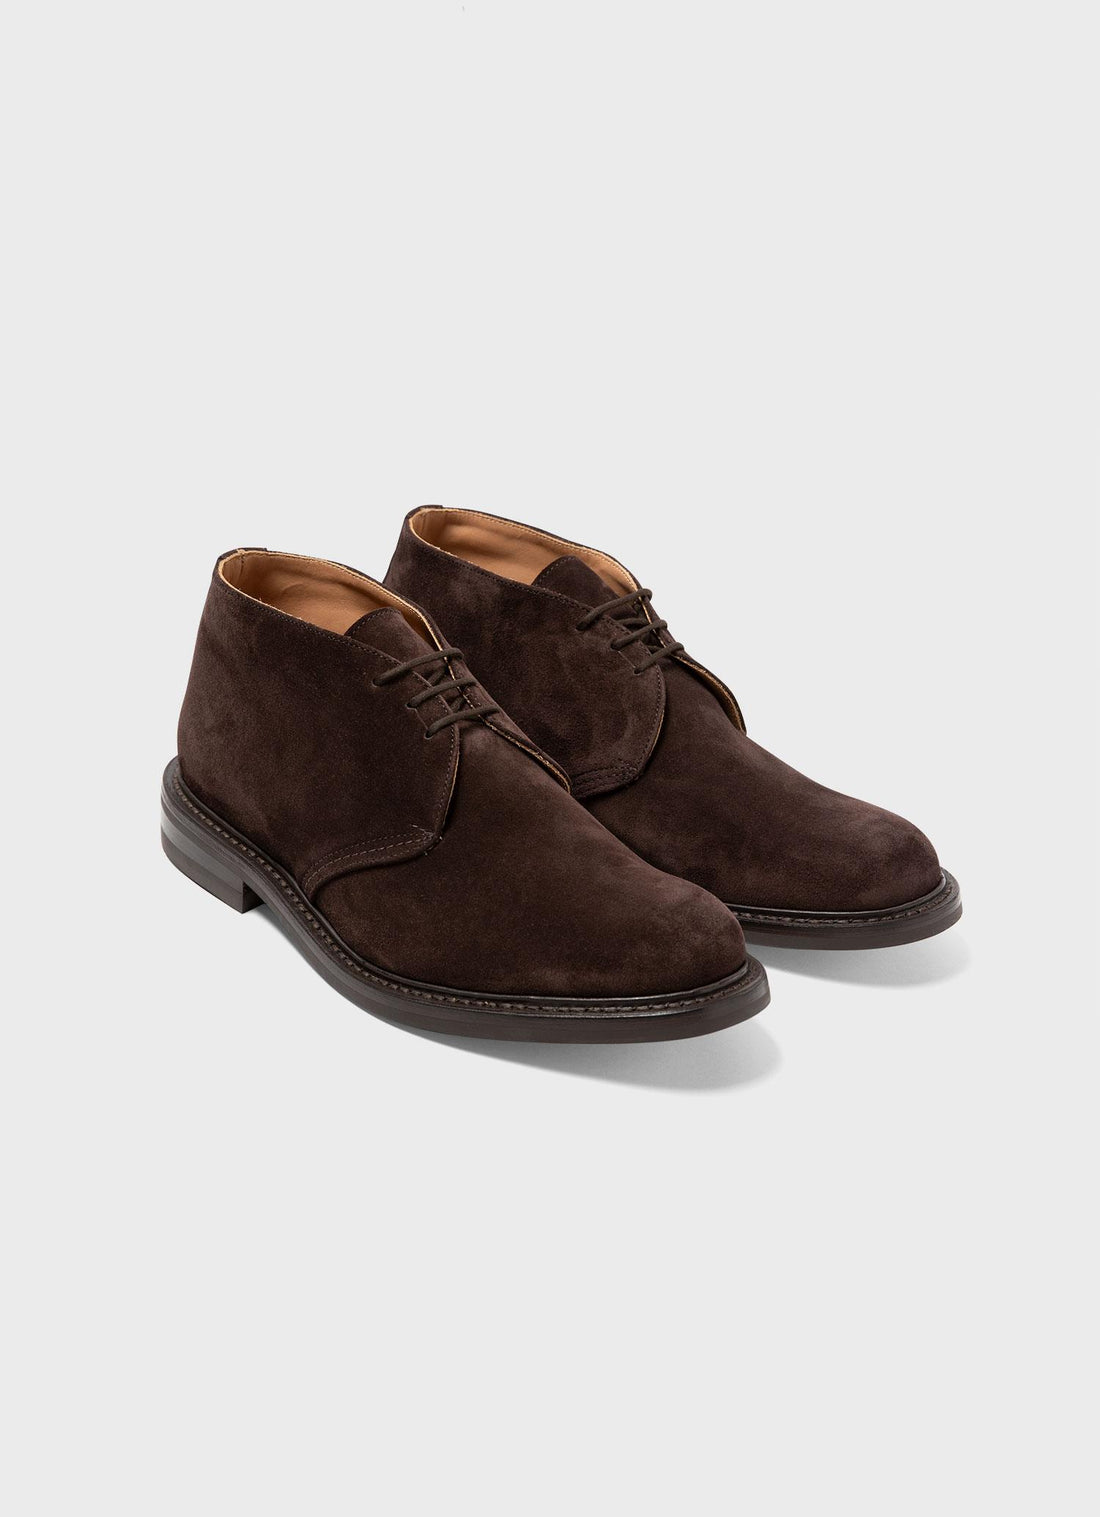 Men's Suede Ankle Boot in Brown in Brown